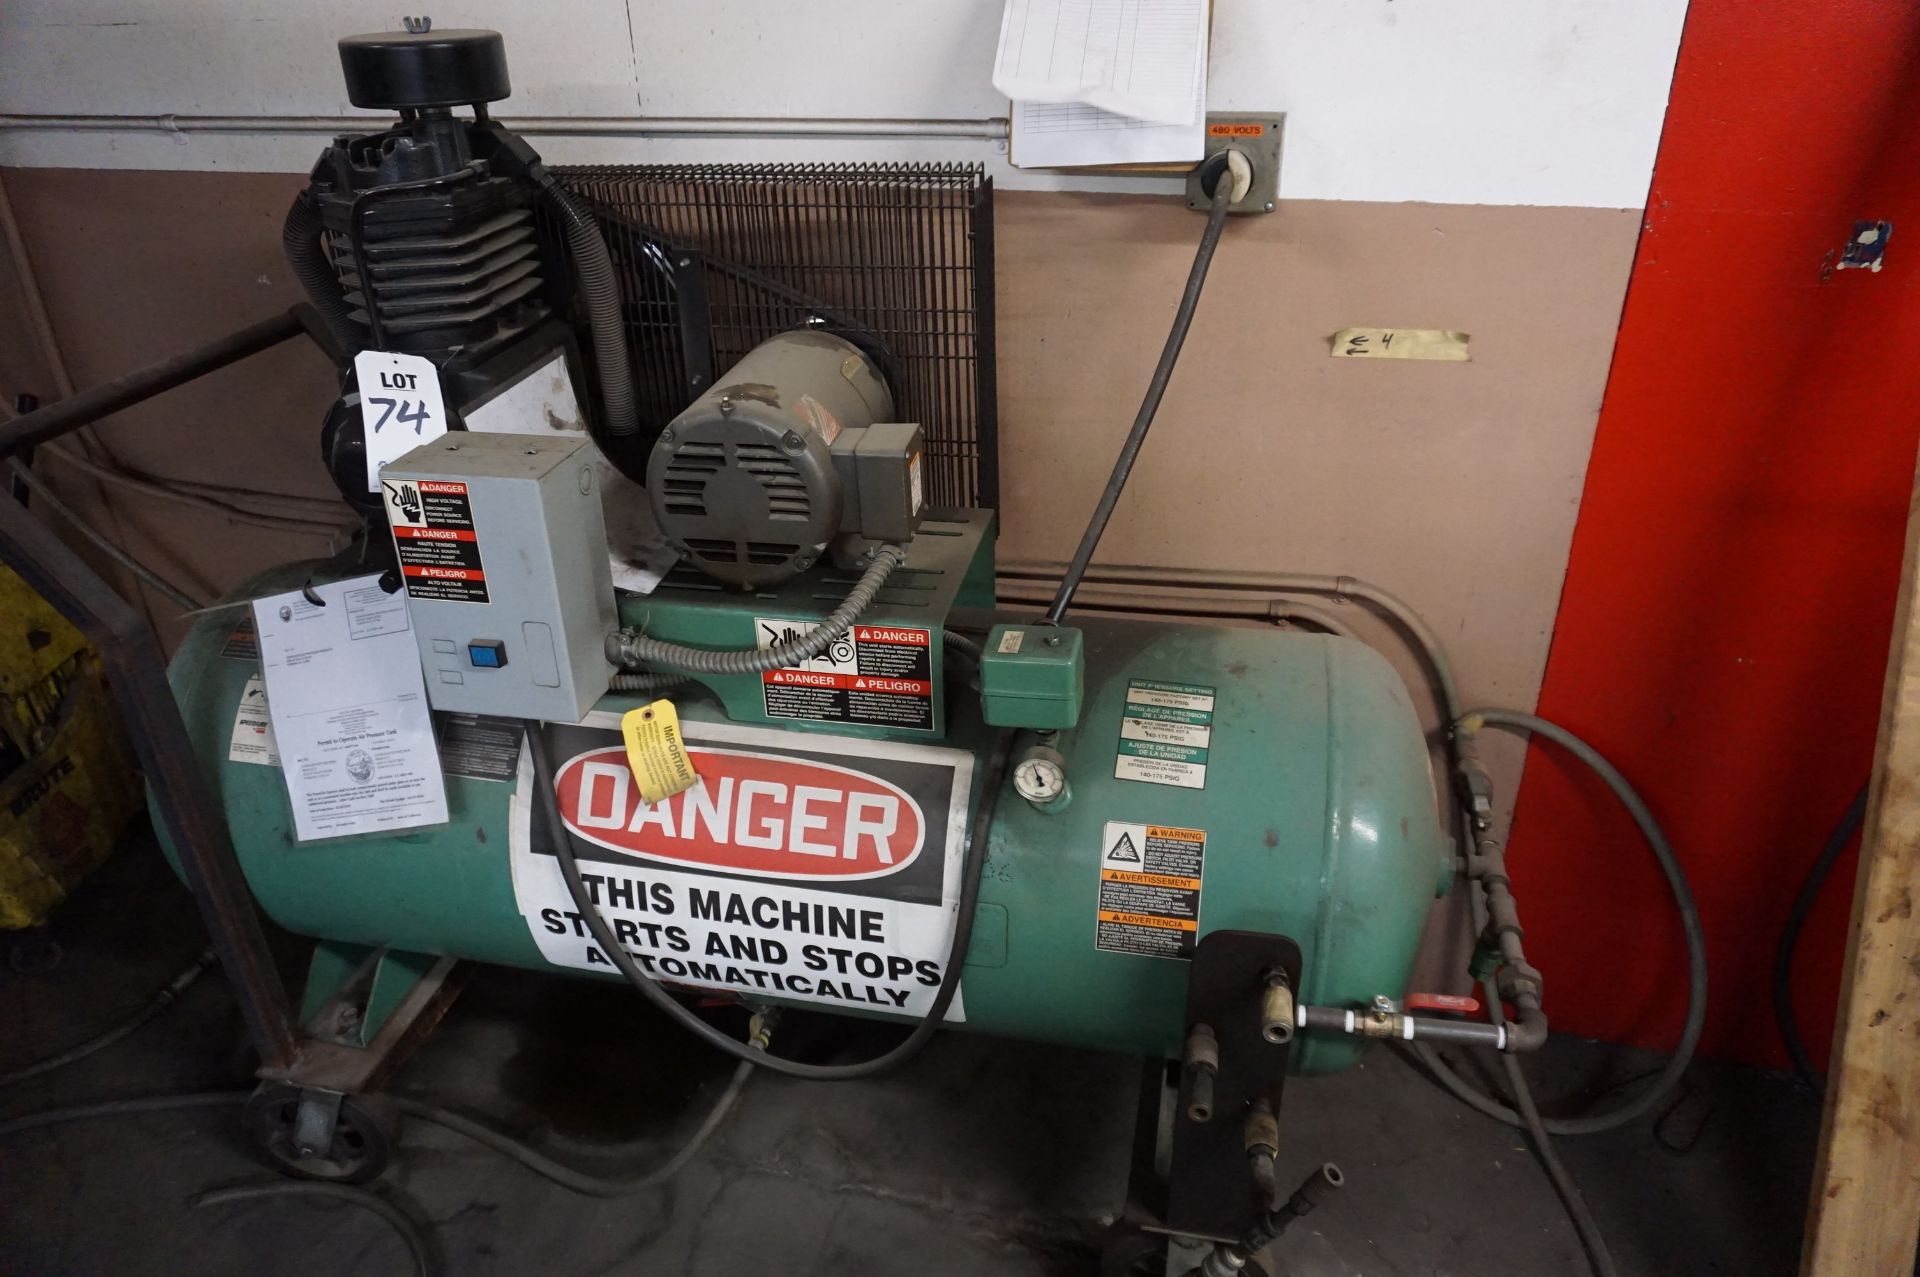 URS IWD54 AIR COMPRESSOR, 750RPM **Rigging provided exclusively by Golden Bear Services. Loading fee